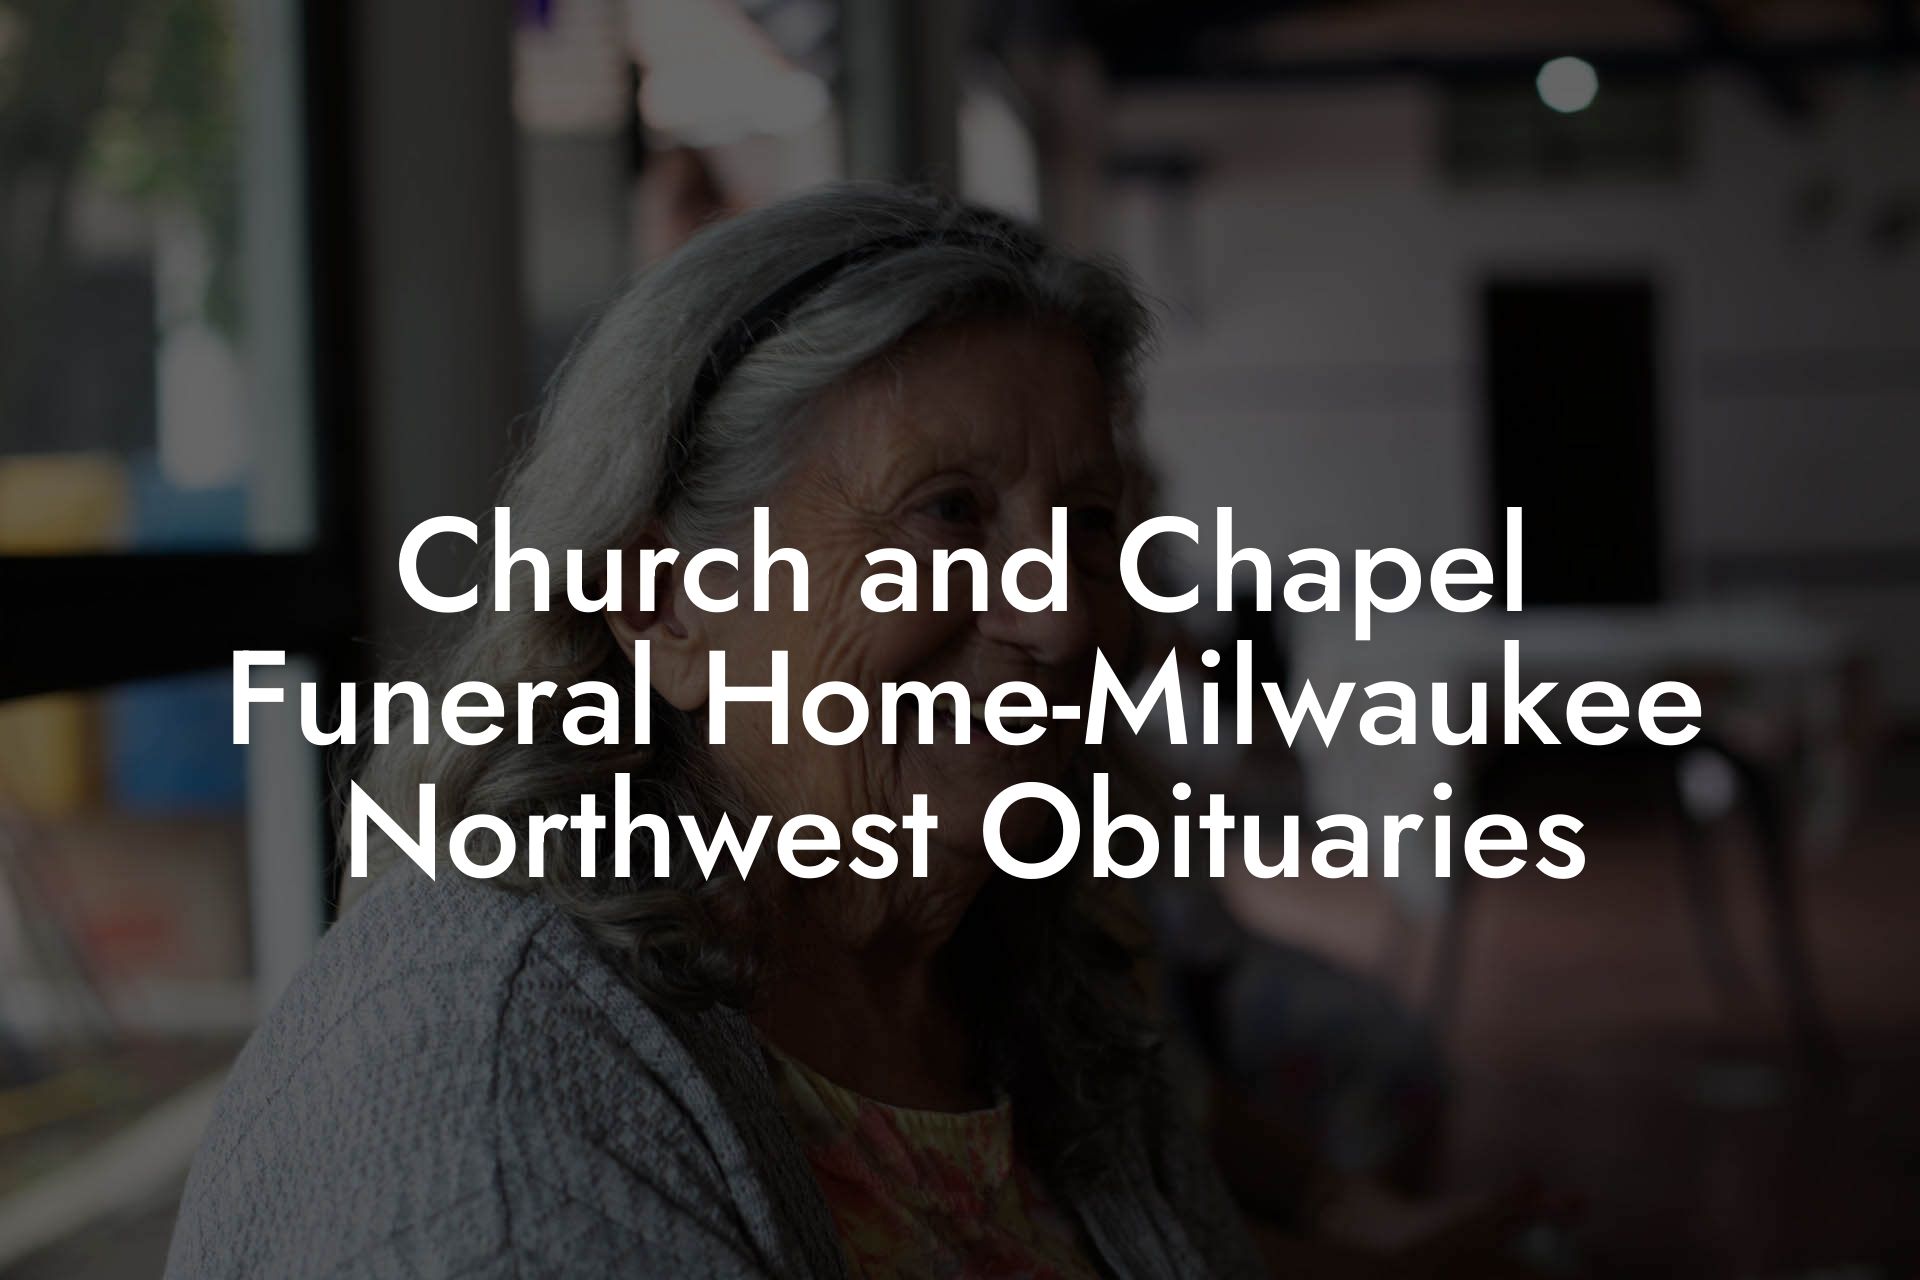 Church and Chapel Funeral Home-Milwaukee Northwest Obituaries